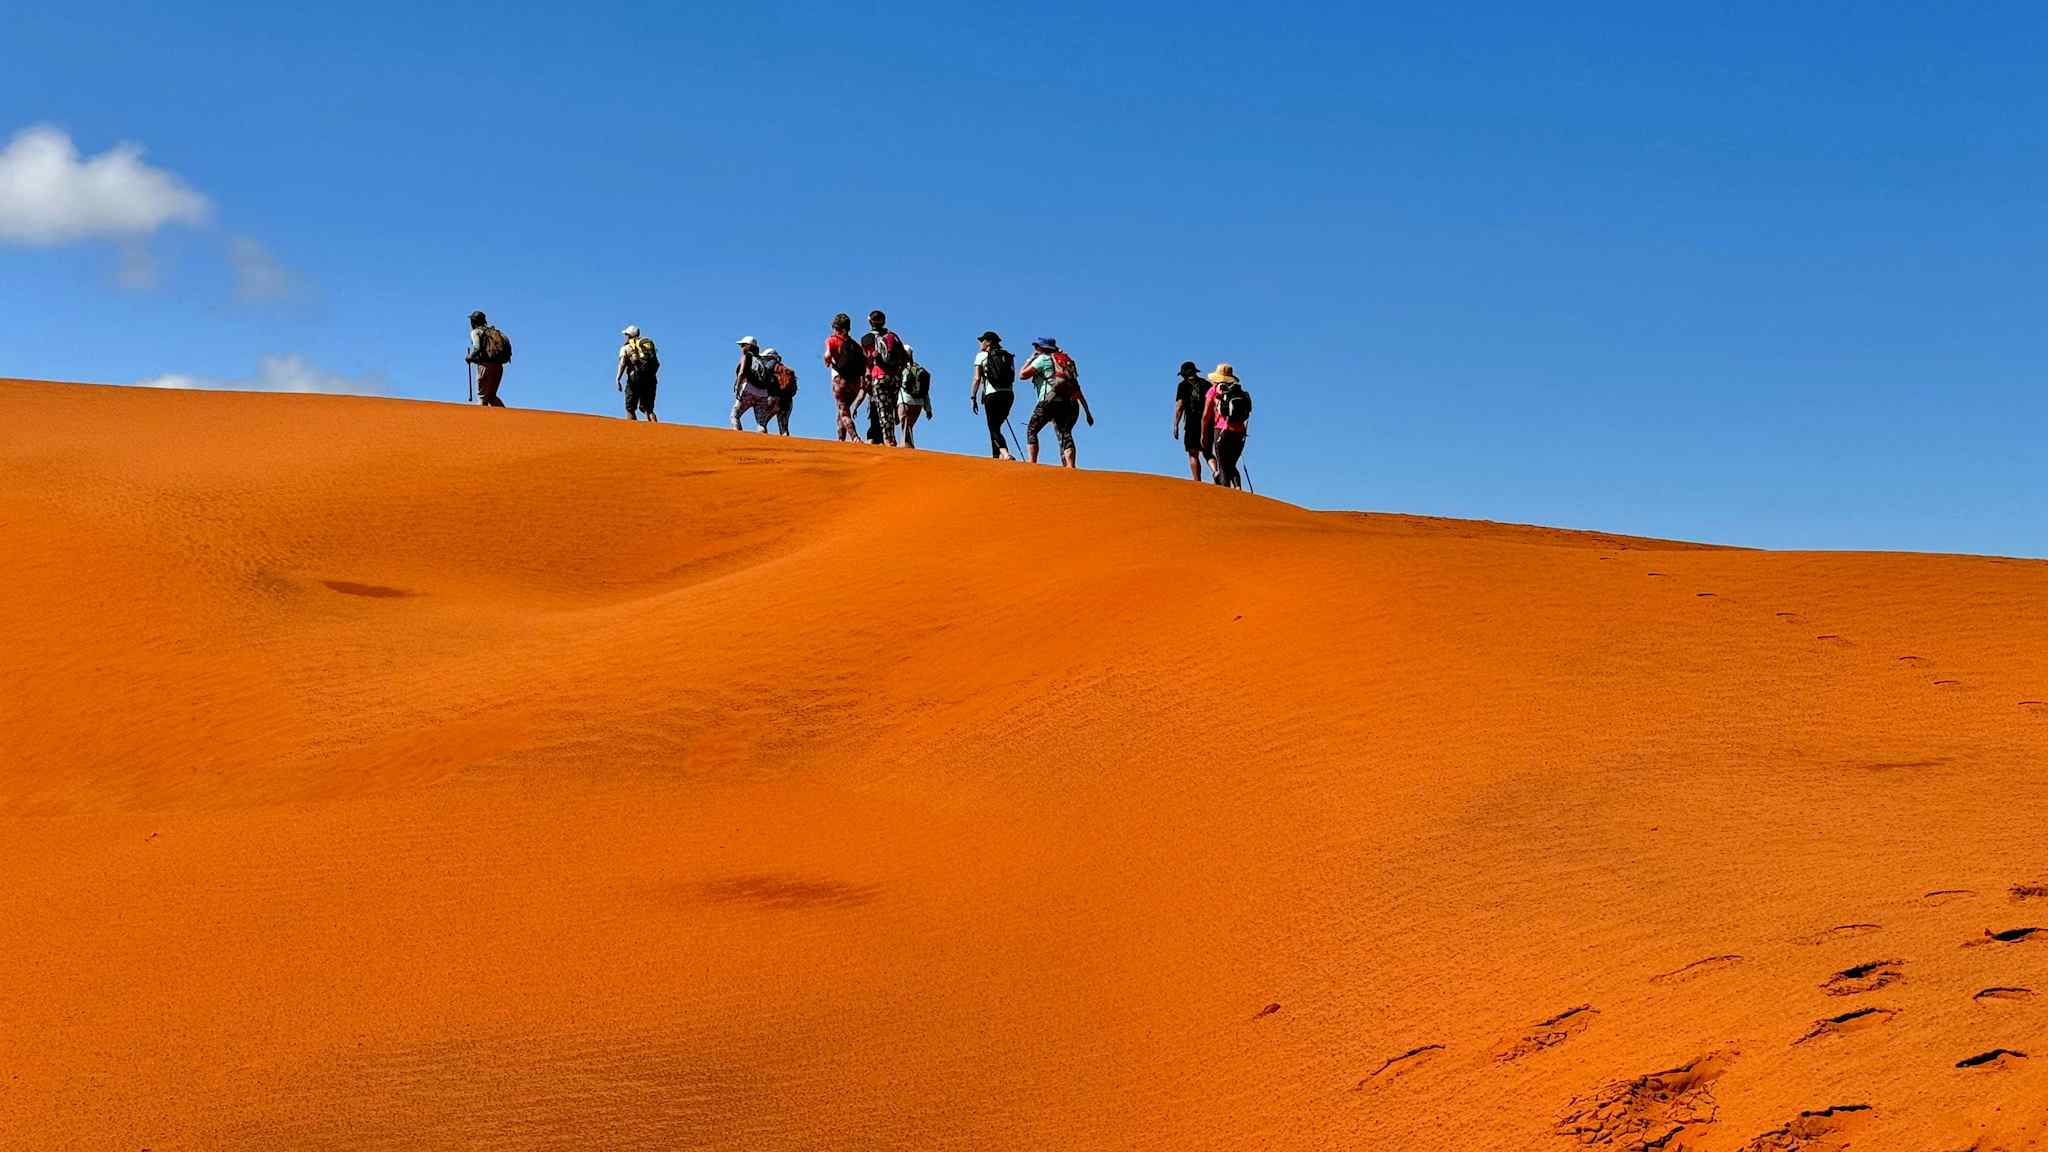 Hikers on the red dunes of Mtentu, South Africa. Photo: Host/Active Escapes